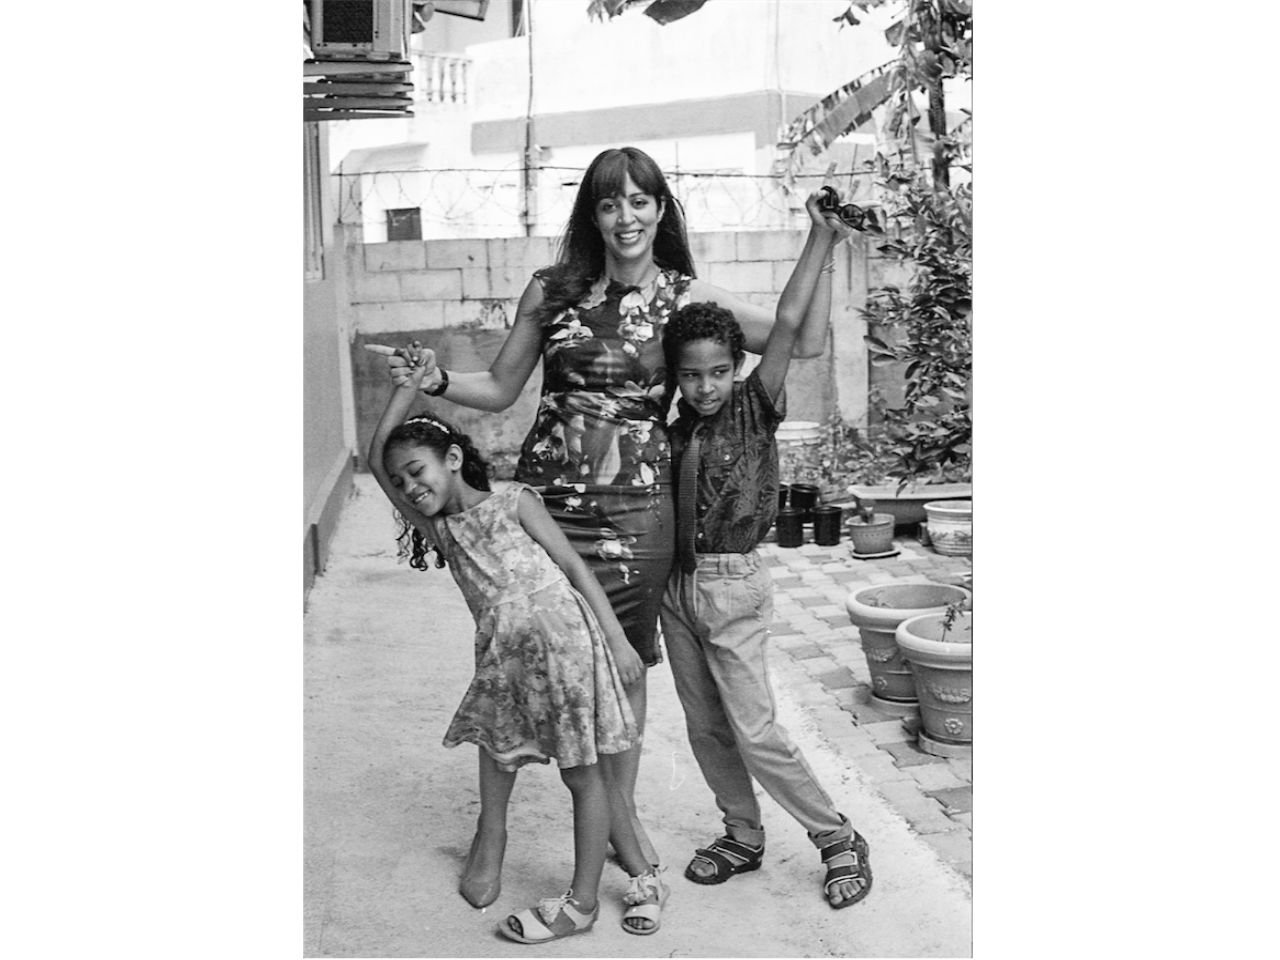 a mom and her son and daughter dressed up and walking down the street pose for a photo